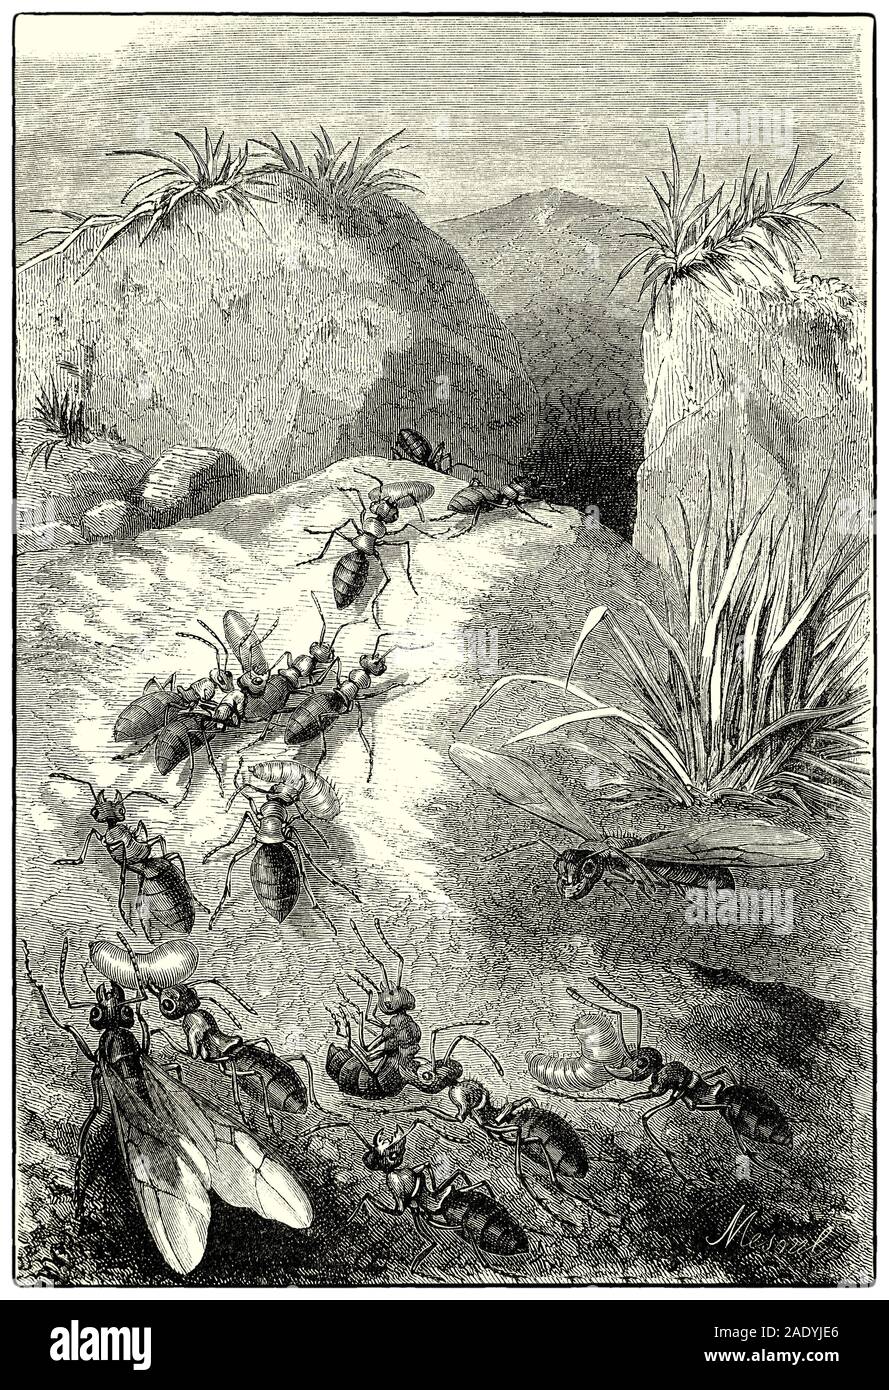 An army of ants returning to their nest with captured grubs etc. The name army ant (or legionary ant or marabunta) is applied to over 200 ant species in different lineages. Due to their aggressive predatory foraging groups, known as 'raids', a huge number of ants forage simultaneously over a certain area. Most ant species will send individual scouts to find food sources and later recruit others from the colony to help; however, army ants dispatch a cooperative, leaderless group of foragers to detect and overwhelm the prey at once Stock Photo